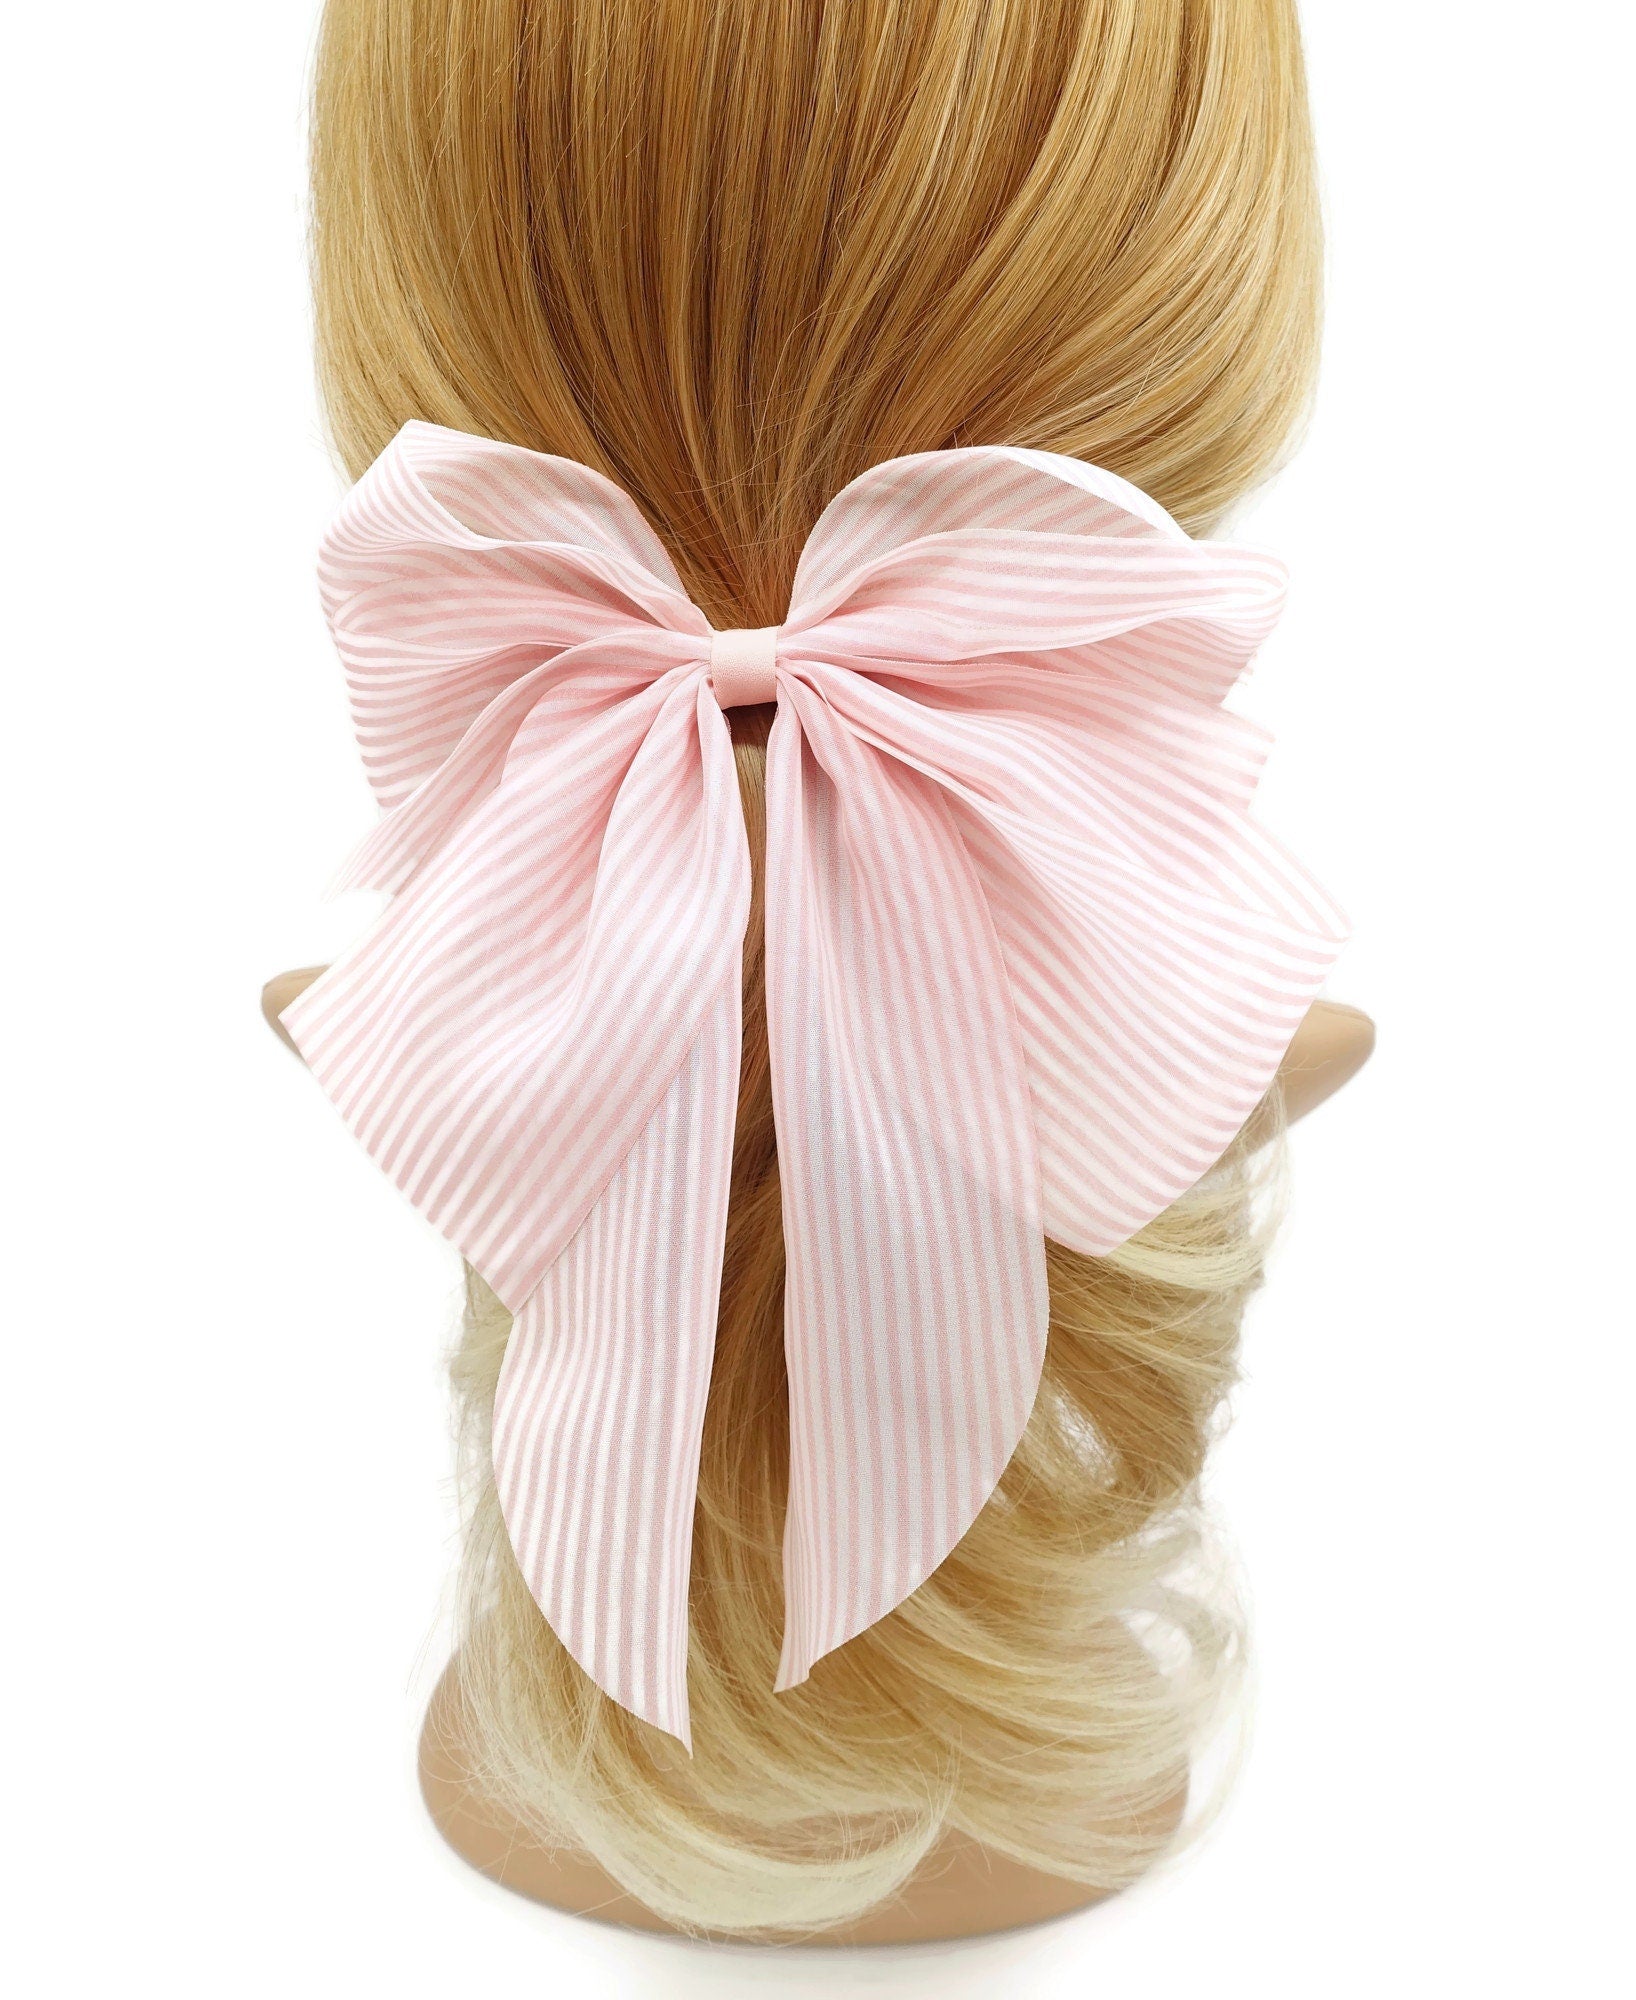 VeryShine Barrette (Bow) Pink narrow stripe hair bow layered style tail hair accessory for women